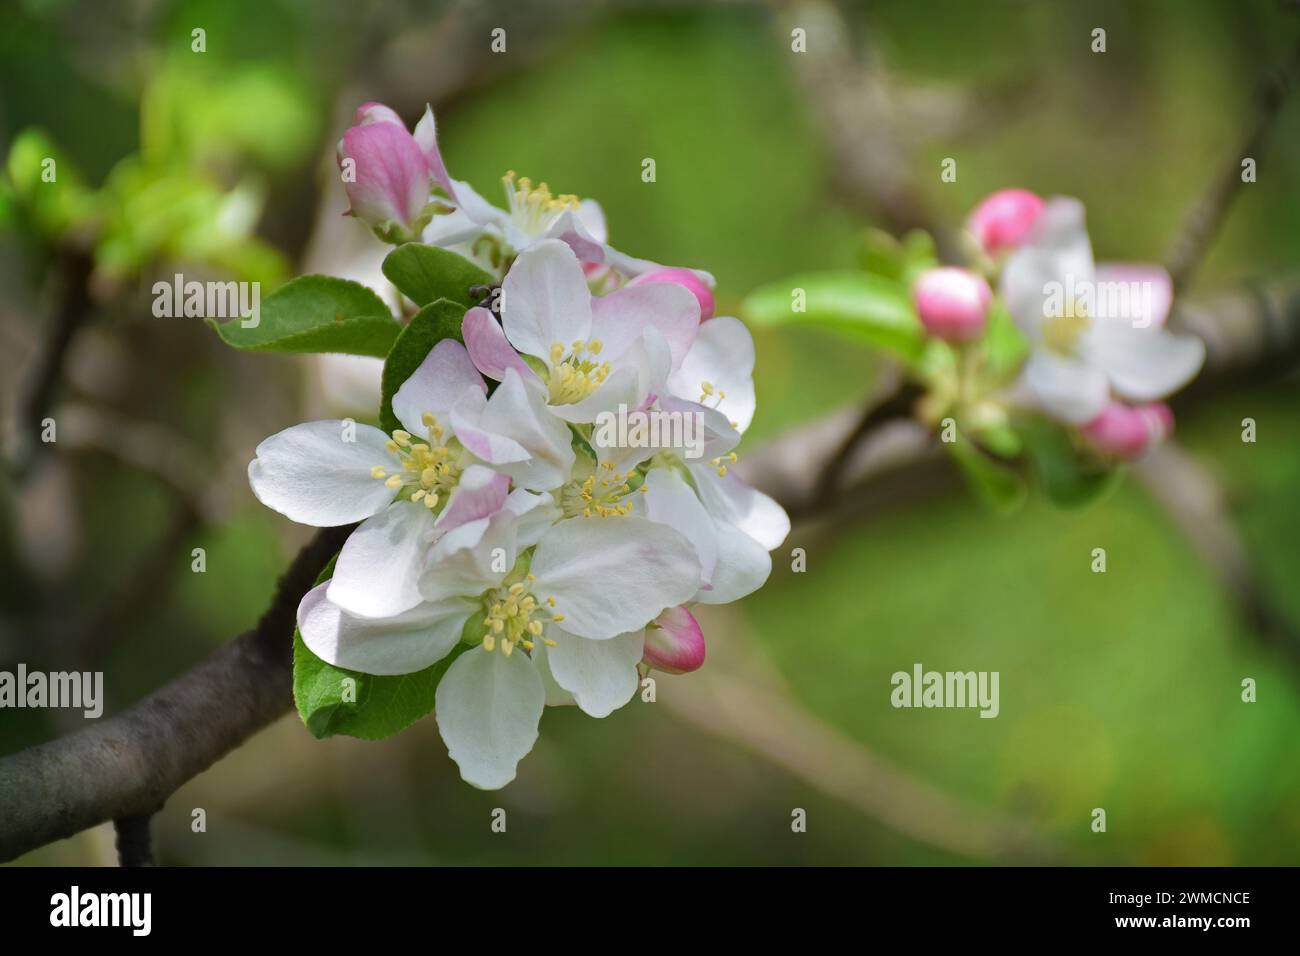 Blossoming apple closeup. Delicate herb, fragile flowers of apple. Spring came. Nature awoke. Starting a new life. The fragrance of blooming gardens. Stock Photo